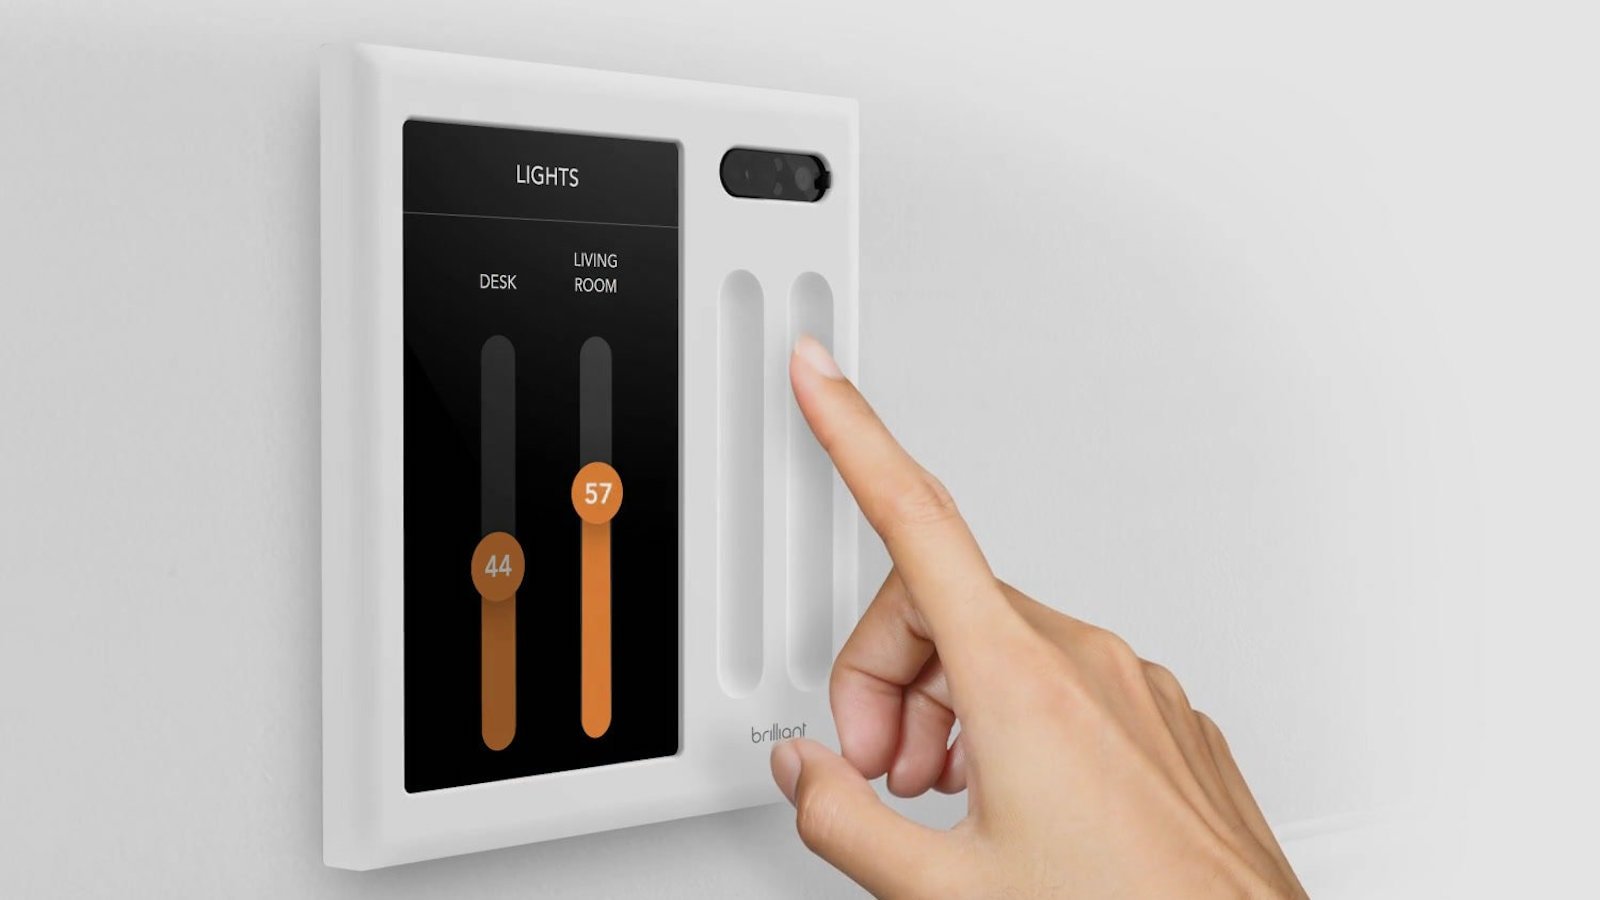 Brilliant 2-Switch Panel smart home controller gives you all-in-one control with an app